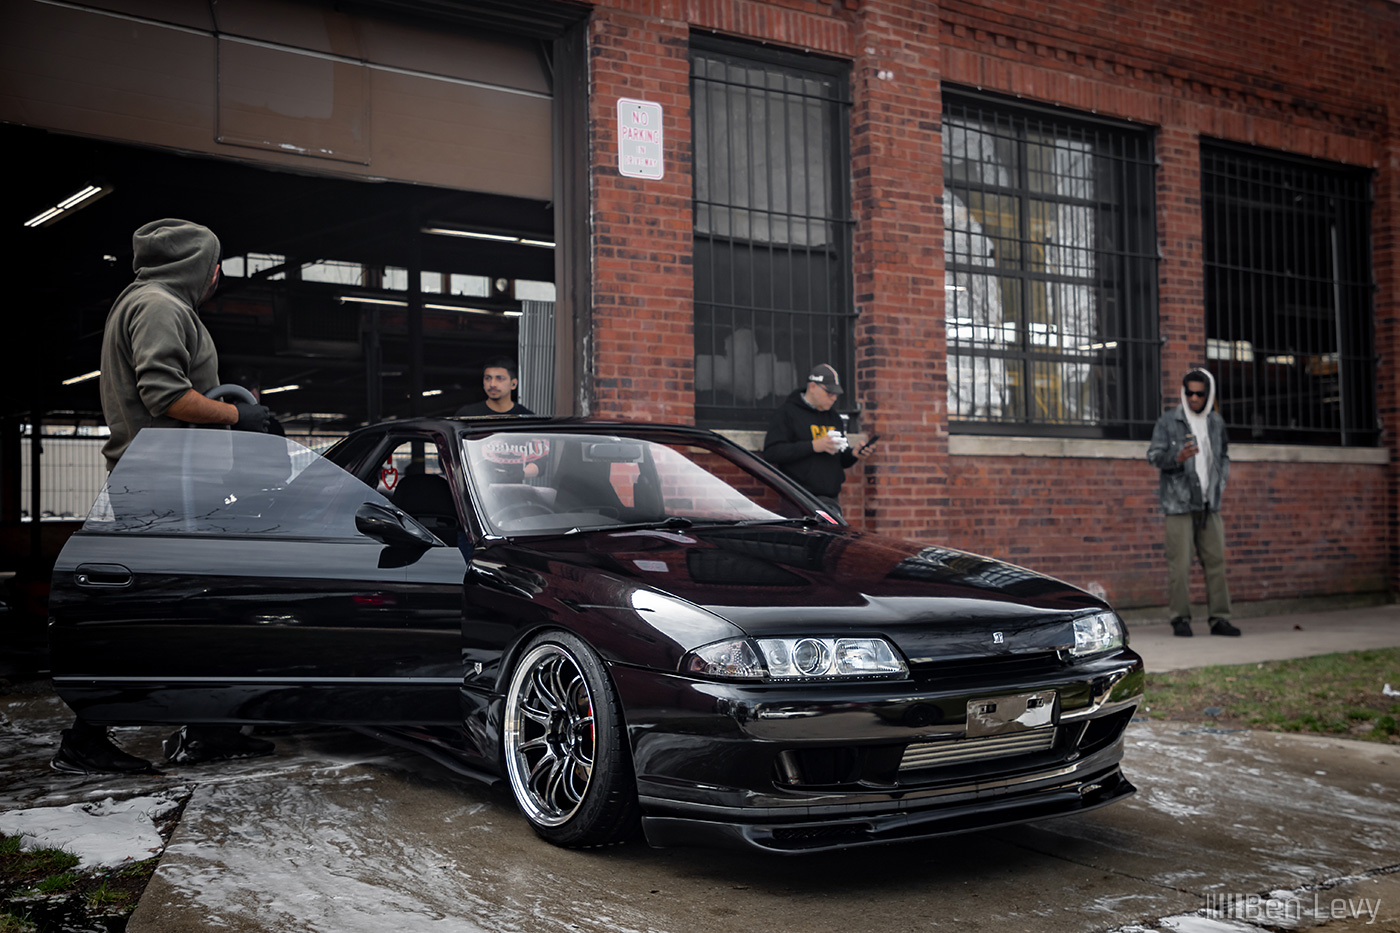 Black R32 Nissan Skyline being detailed at The Outfit in Chicago